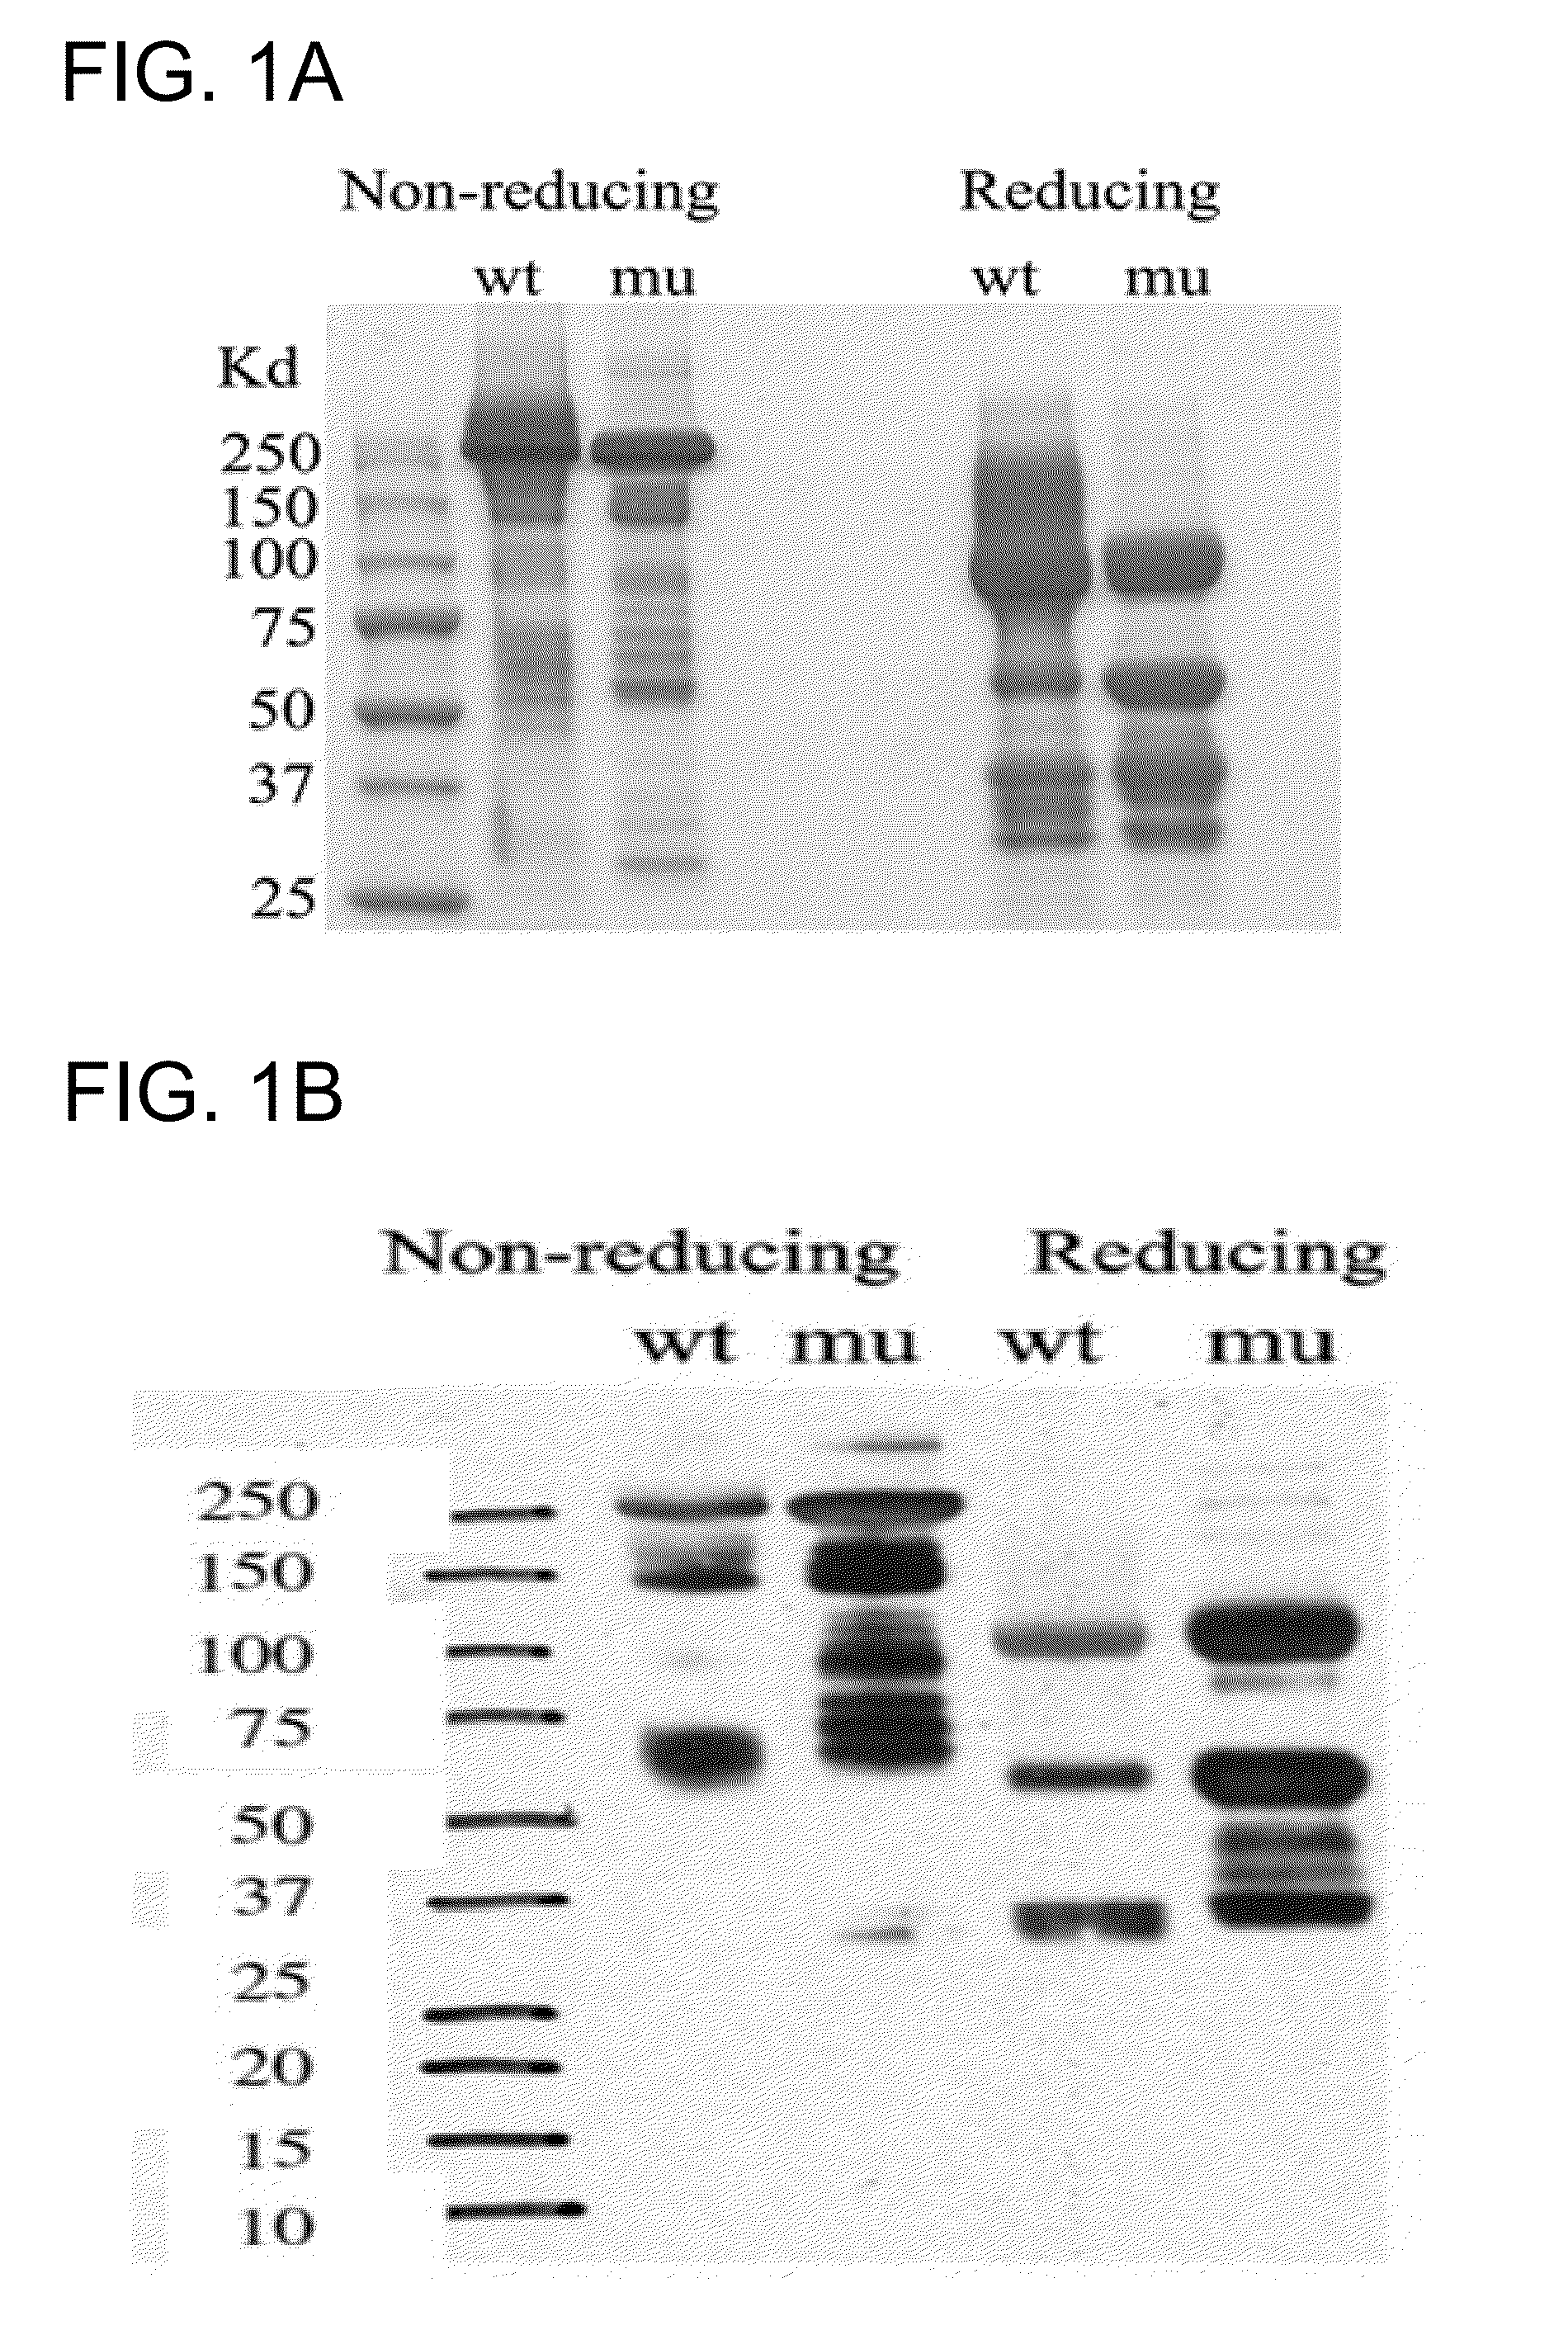 Human monoclonal antibodies specific for glypican-3 and use thereof